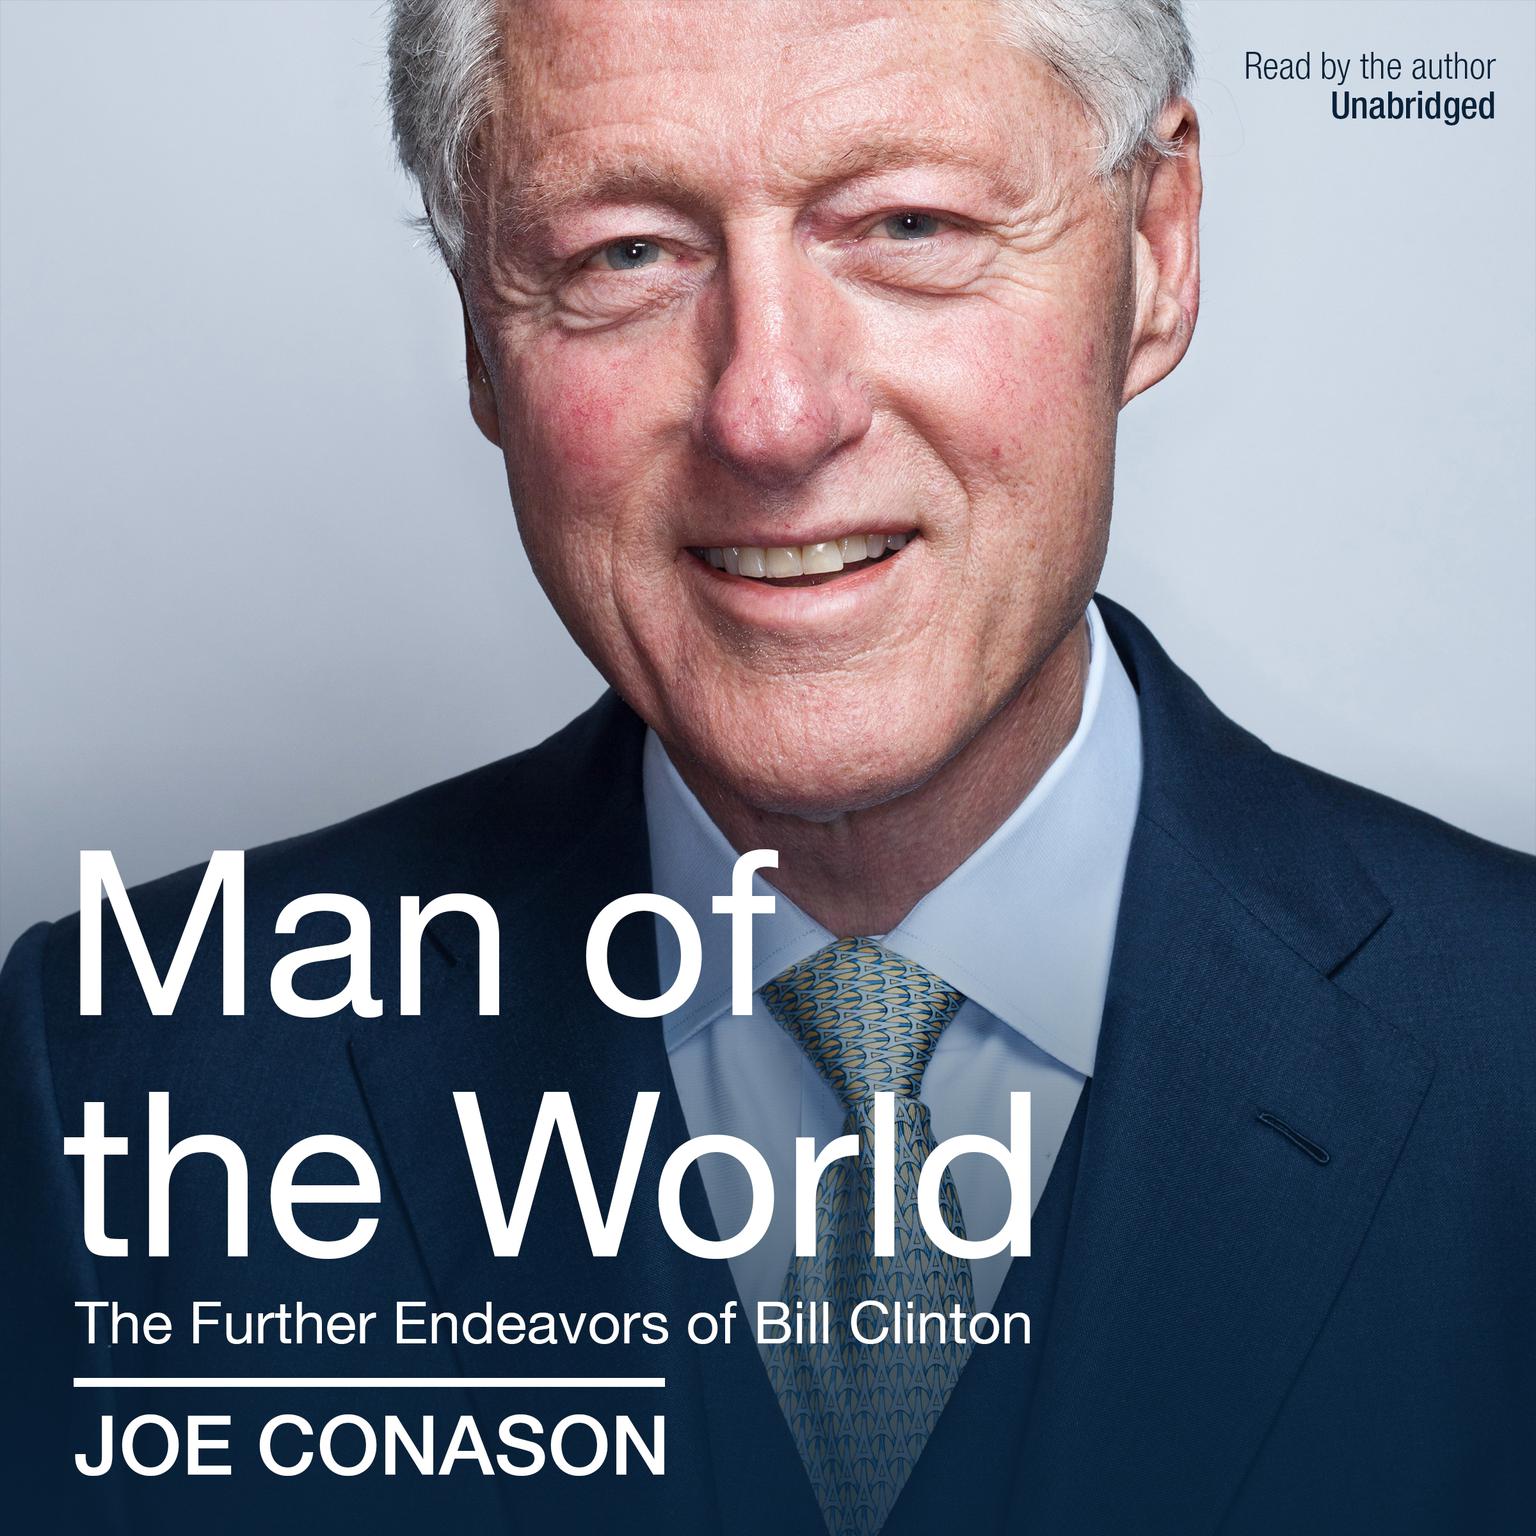 Man of the World: The Further Endeavors of Bill Clinton Audiobook, by Joe Conason